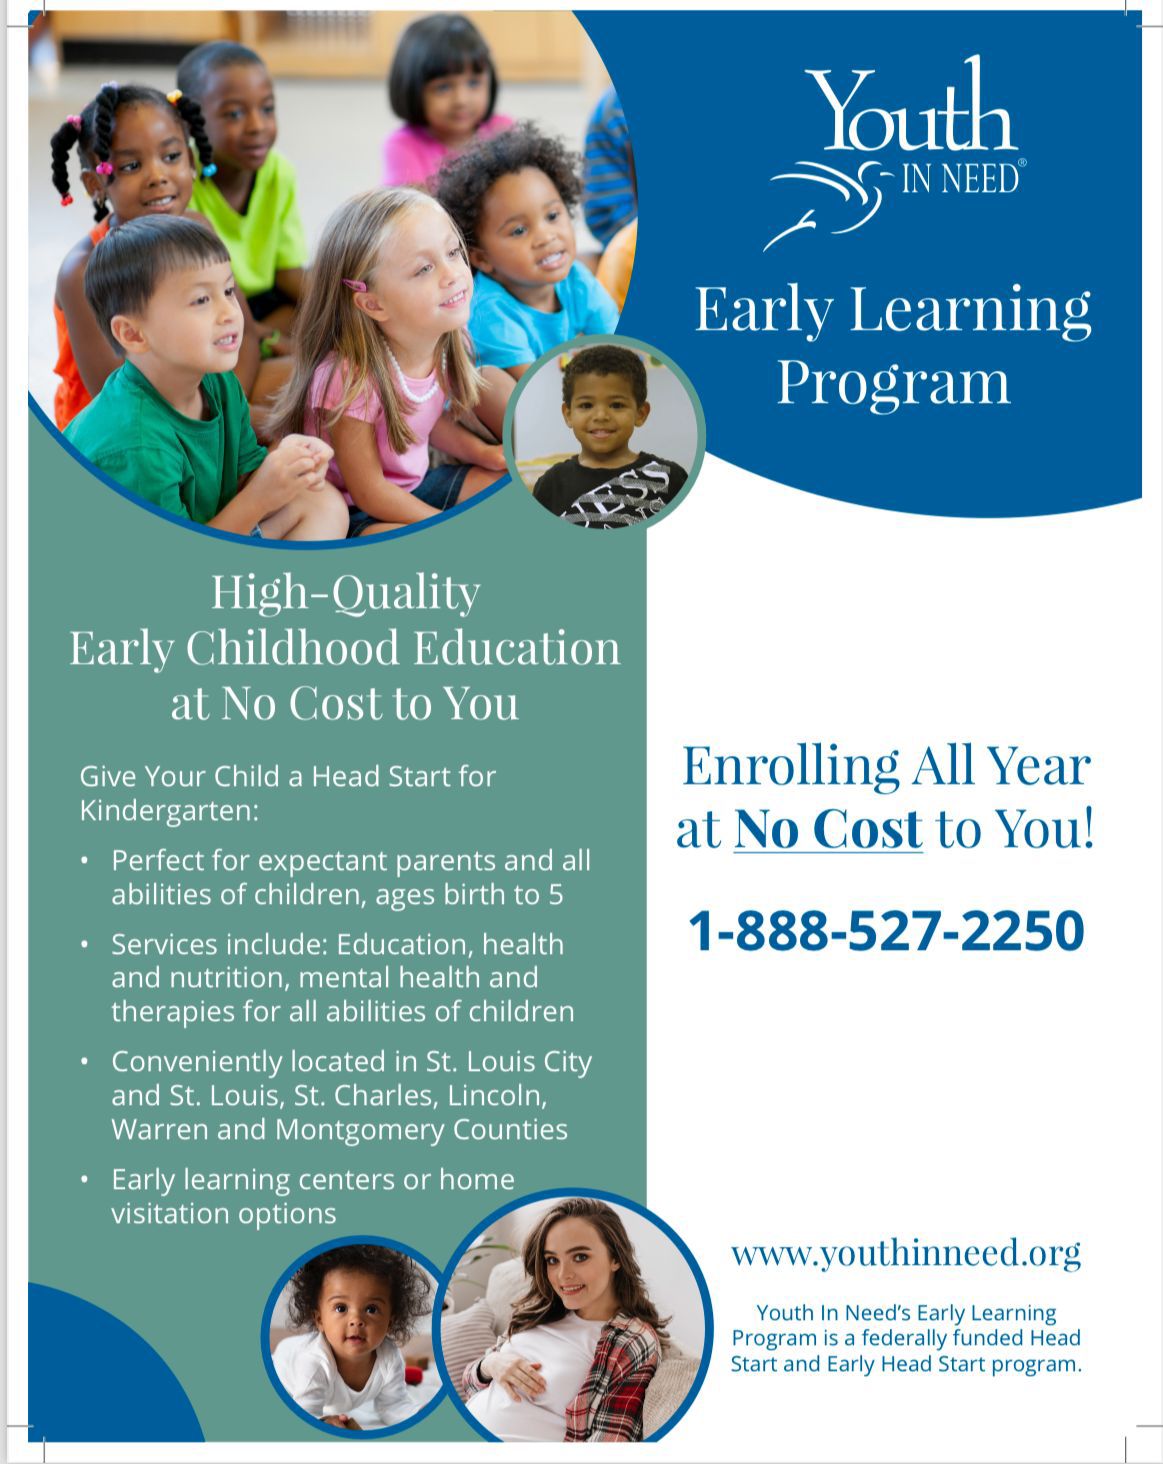 Youth in Need early learning program